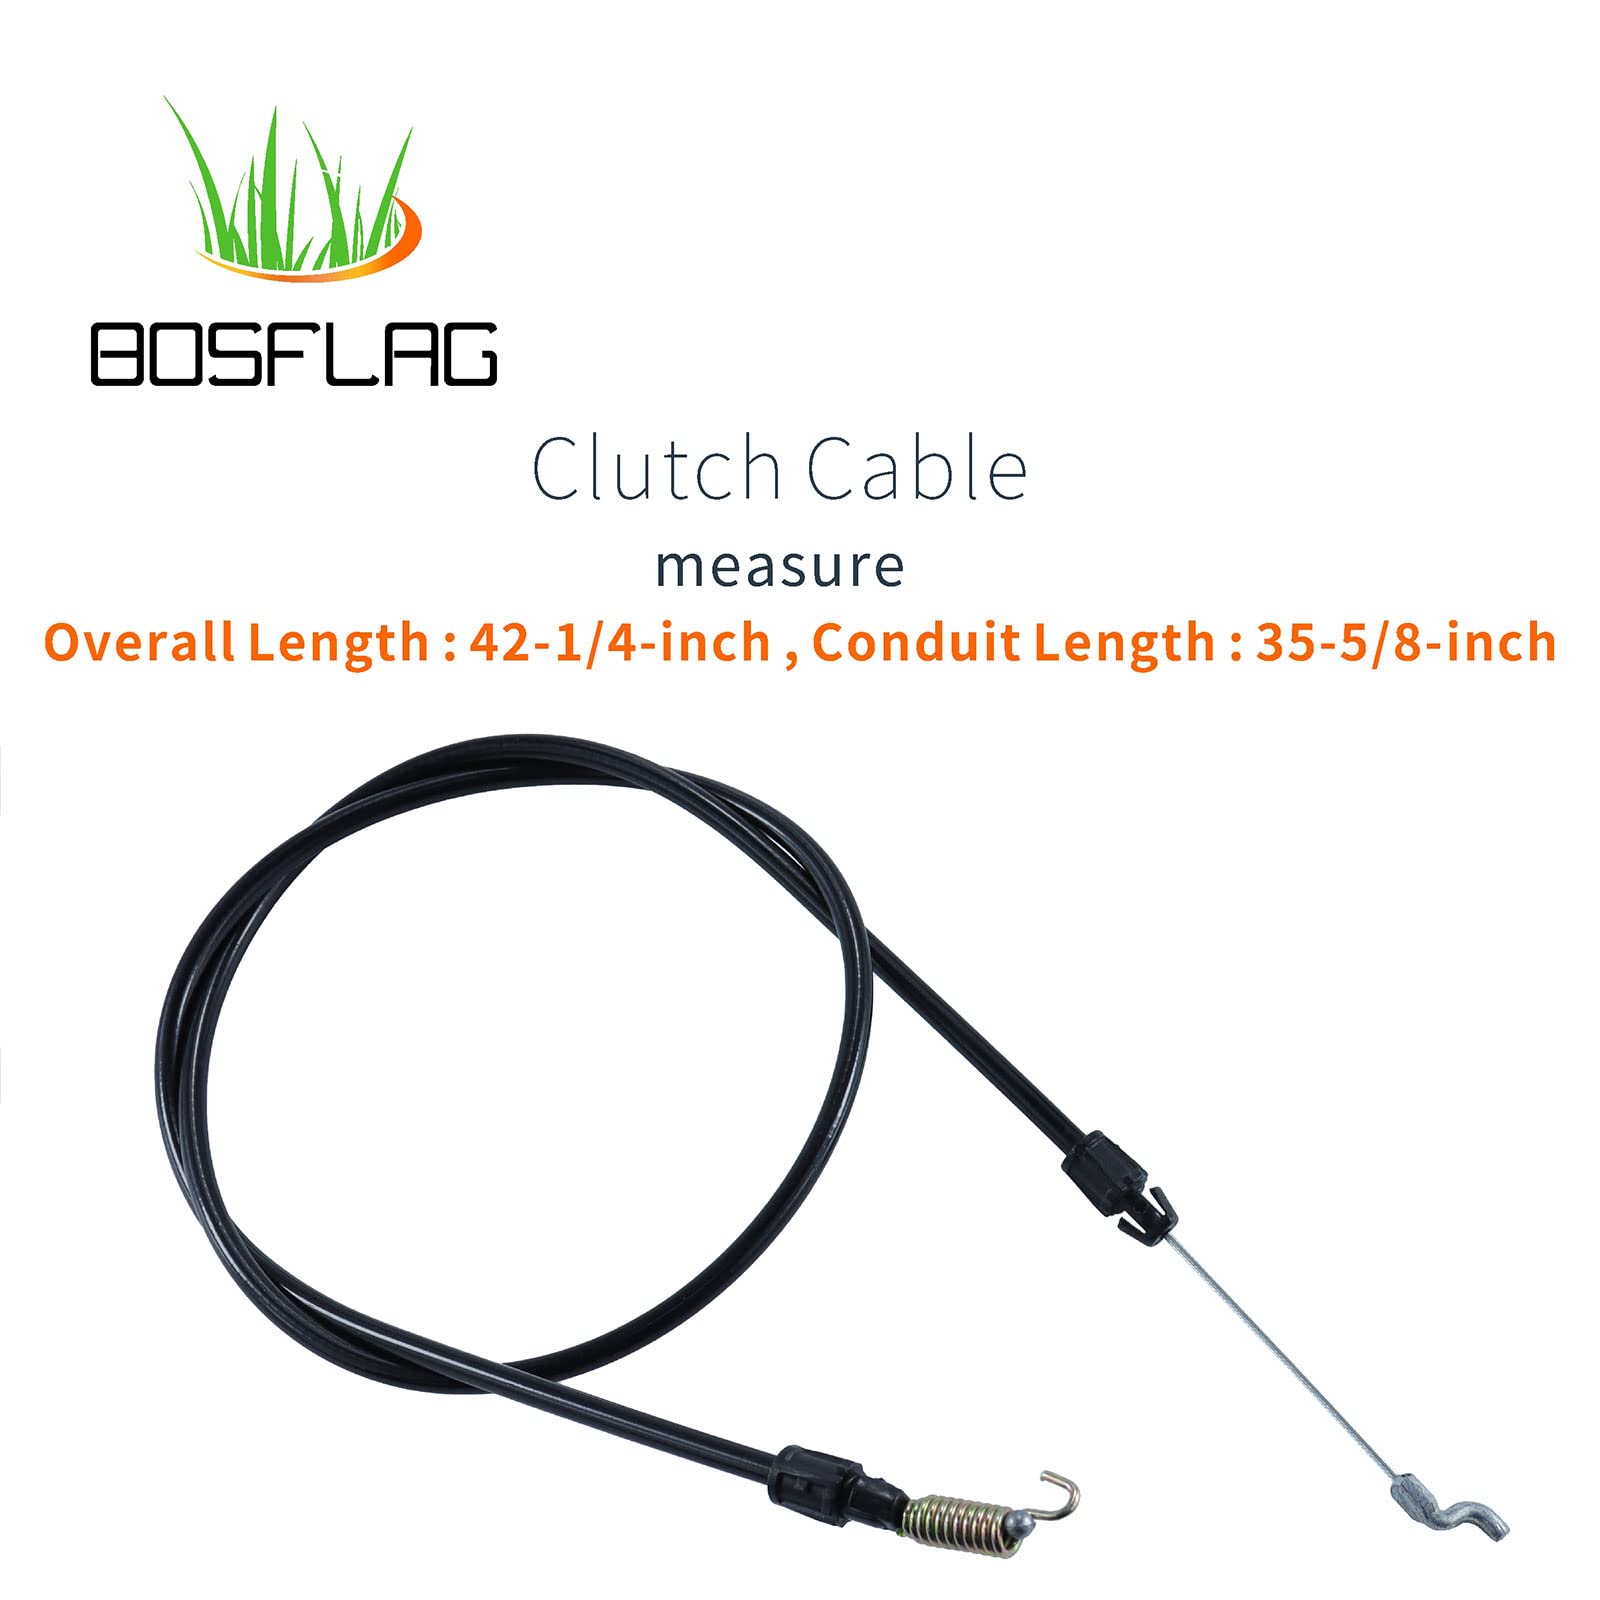 BOSFLAG 946-0910a Clutch Control Cable Replaces MTD 946-0910a Clutch Cable, 946-0910, 946 0910A, 746-0910a Cable, 746-0910, 746 0910 for MTD SB45, SB55, Troy-Bilt 521, 721 Squall 5&7HP 21" Snowblowers